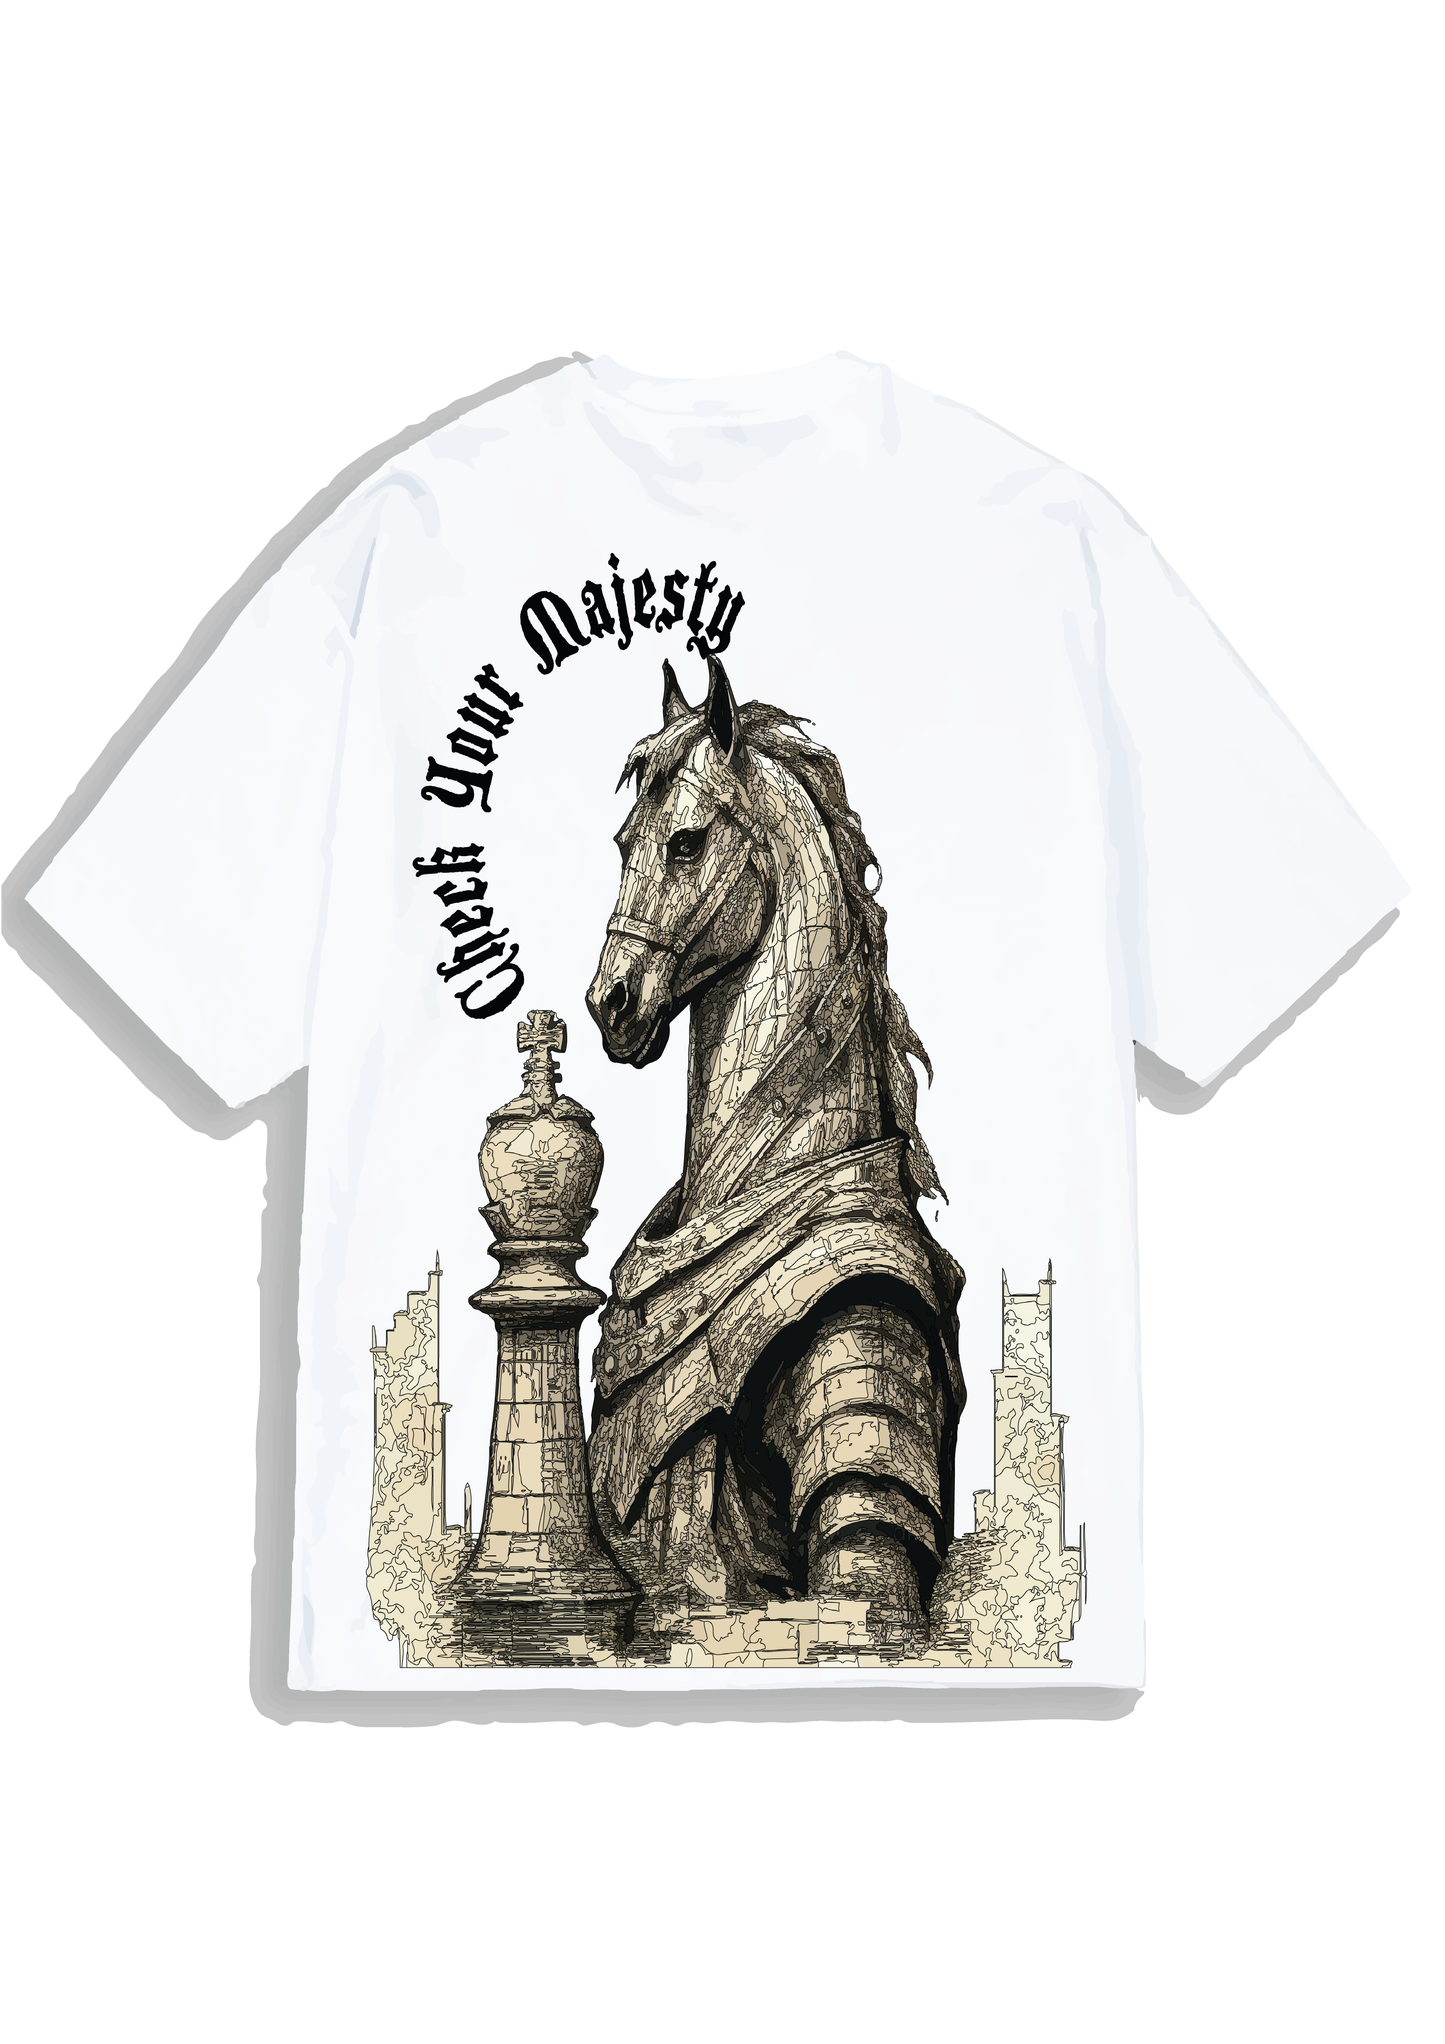 Checkmate T-Shirt (Limited Edition)